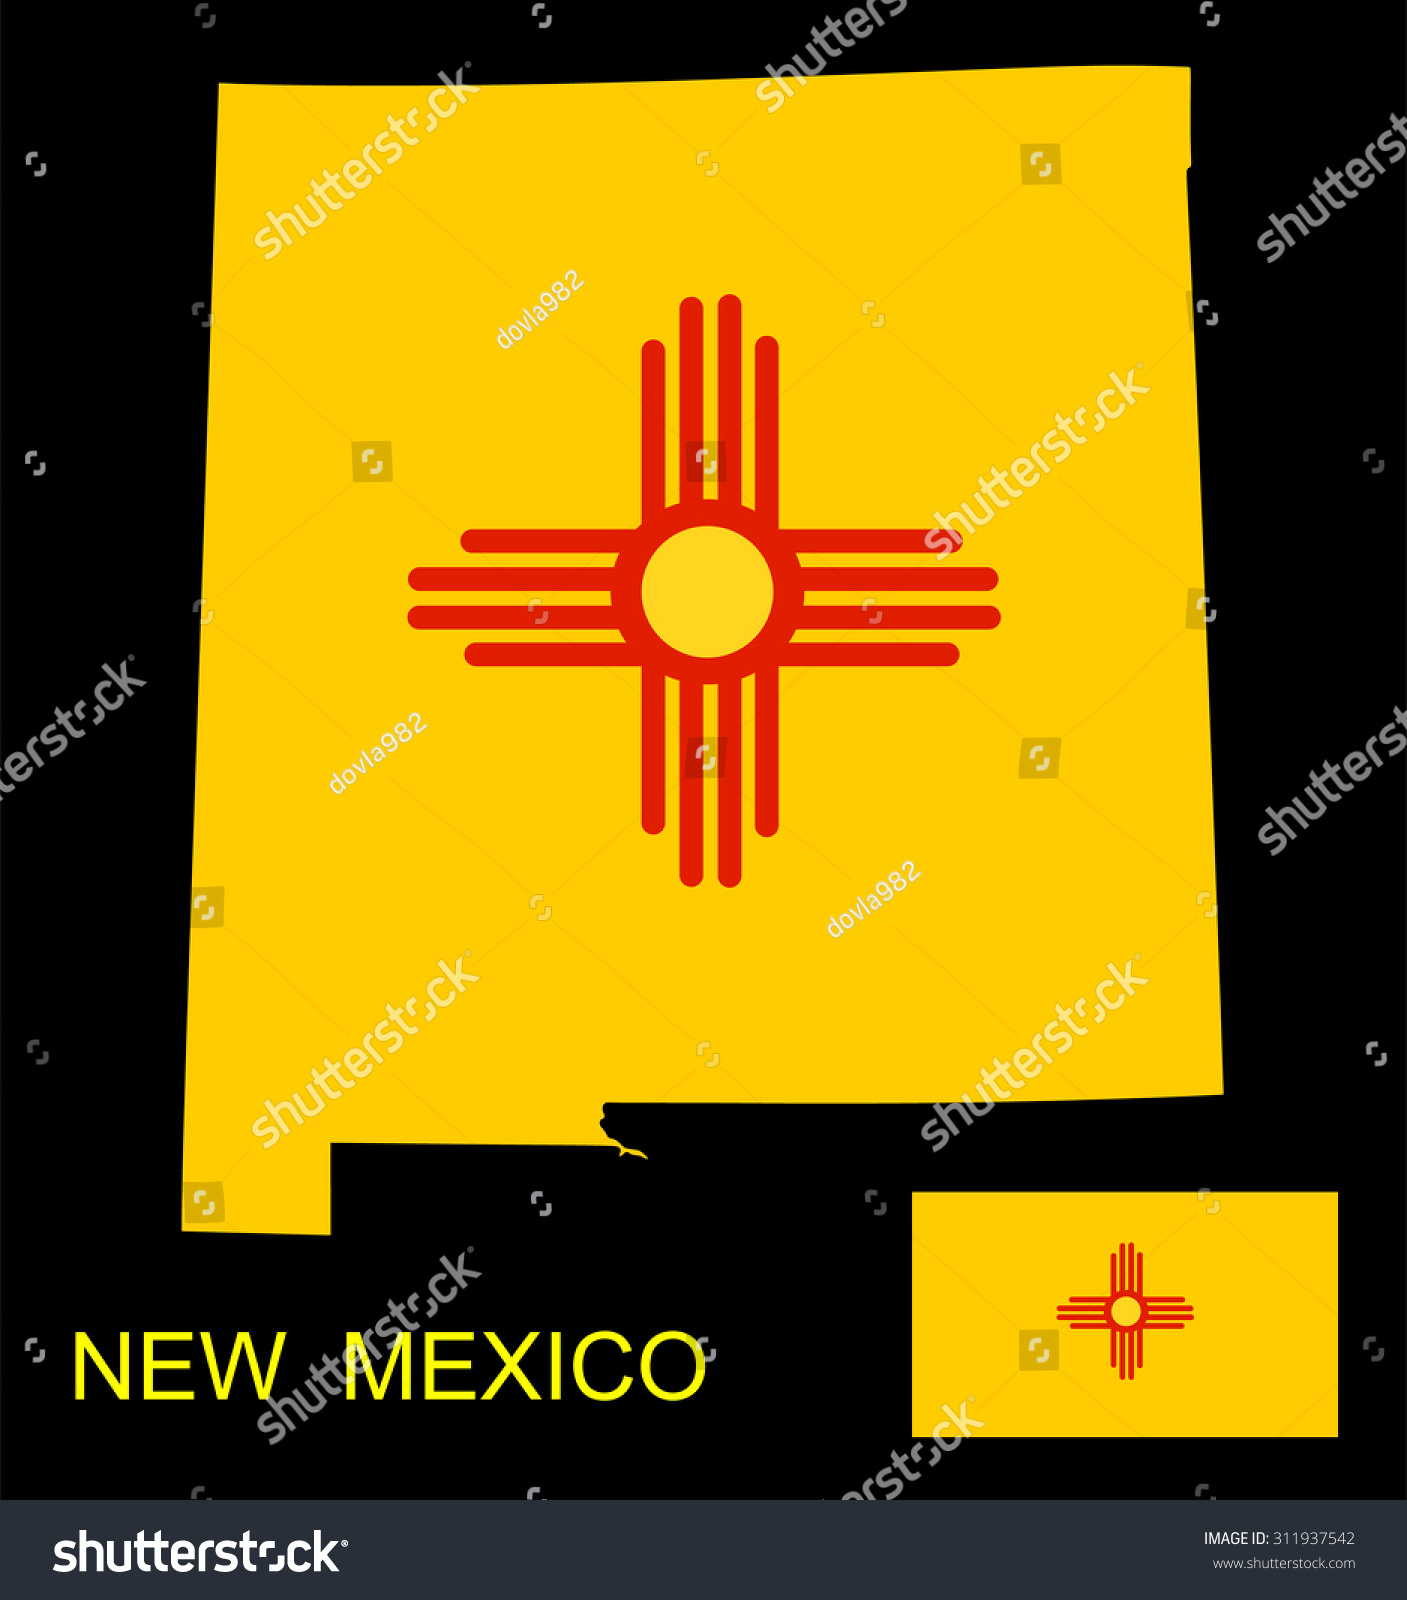 map-and-flag-of-the-state-of-new-mexico-vector-illustration-isolated-on